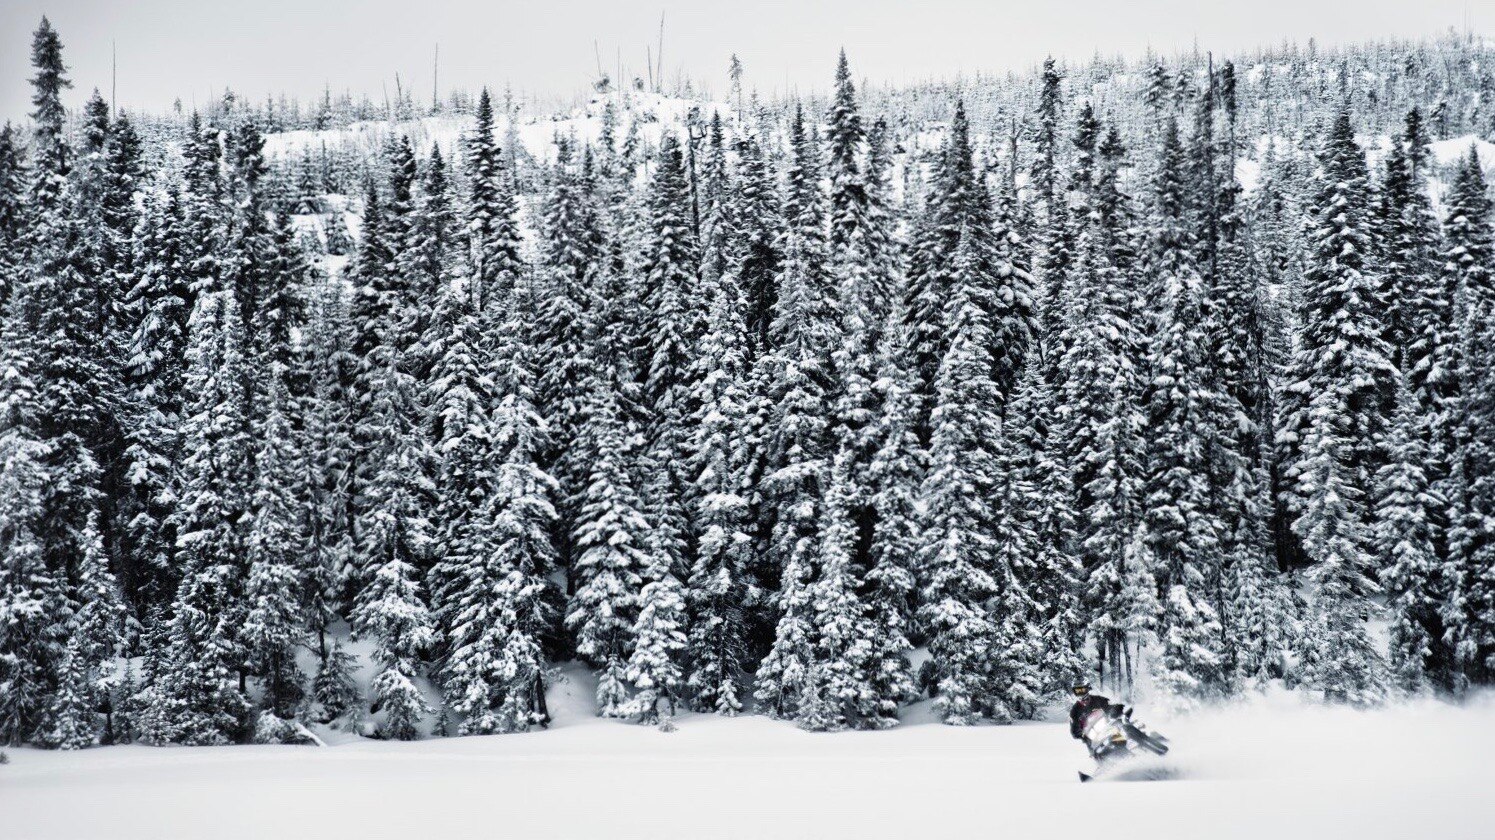 A snowmobiler riding in deep snow in forest